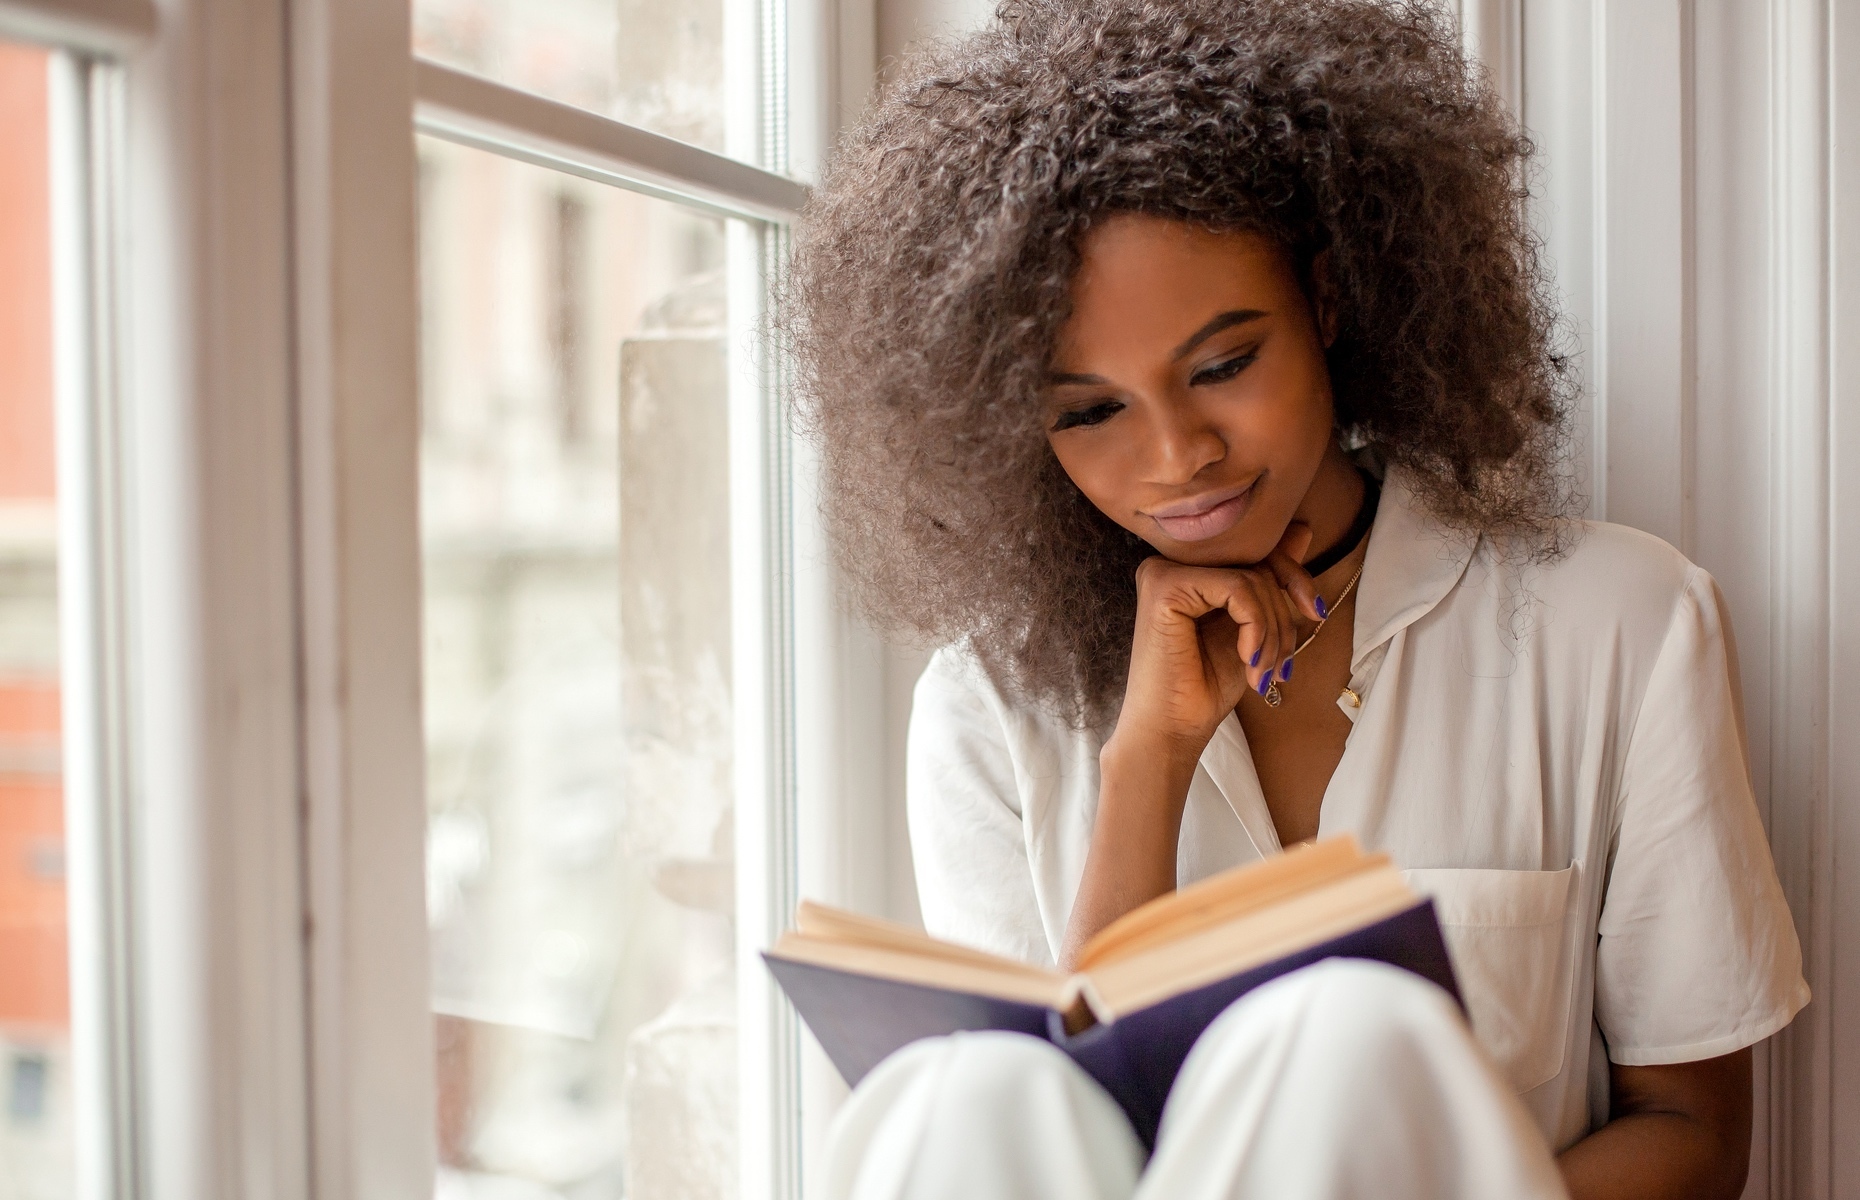 <p>Feeling stuck in a rut? Sometimes all it takes is a change in perspective to rejuvenate and inspire you. Books are the perfect way to see the world from a different angle. Here are 30 reads that will change the way you think—and maybe even change your life.</p>